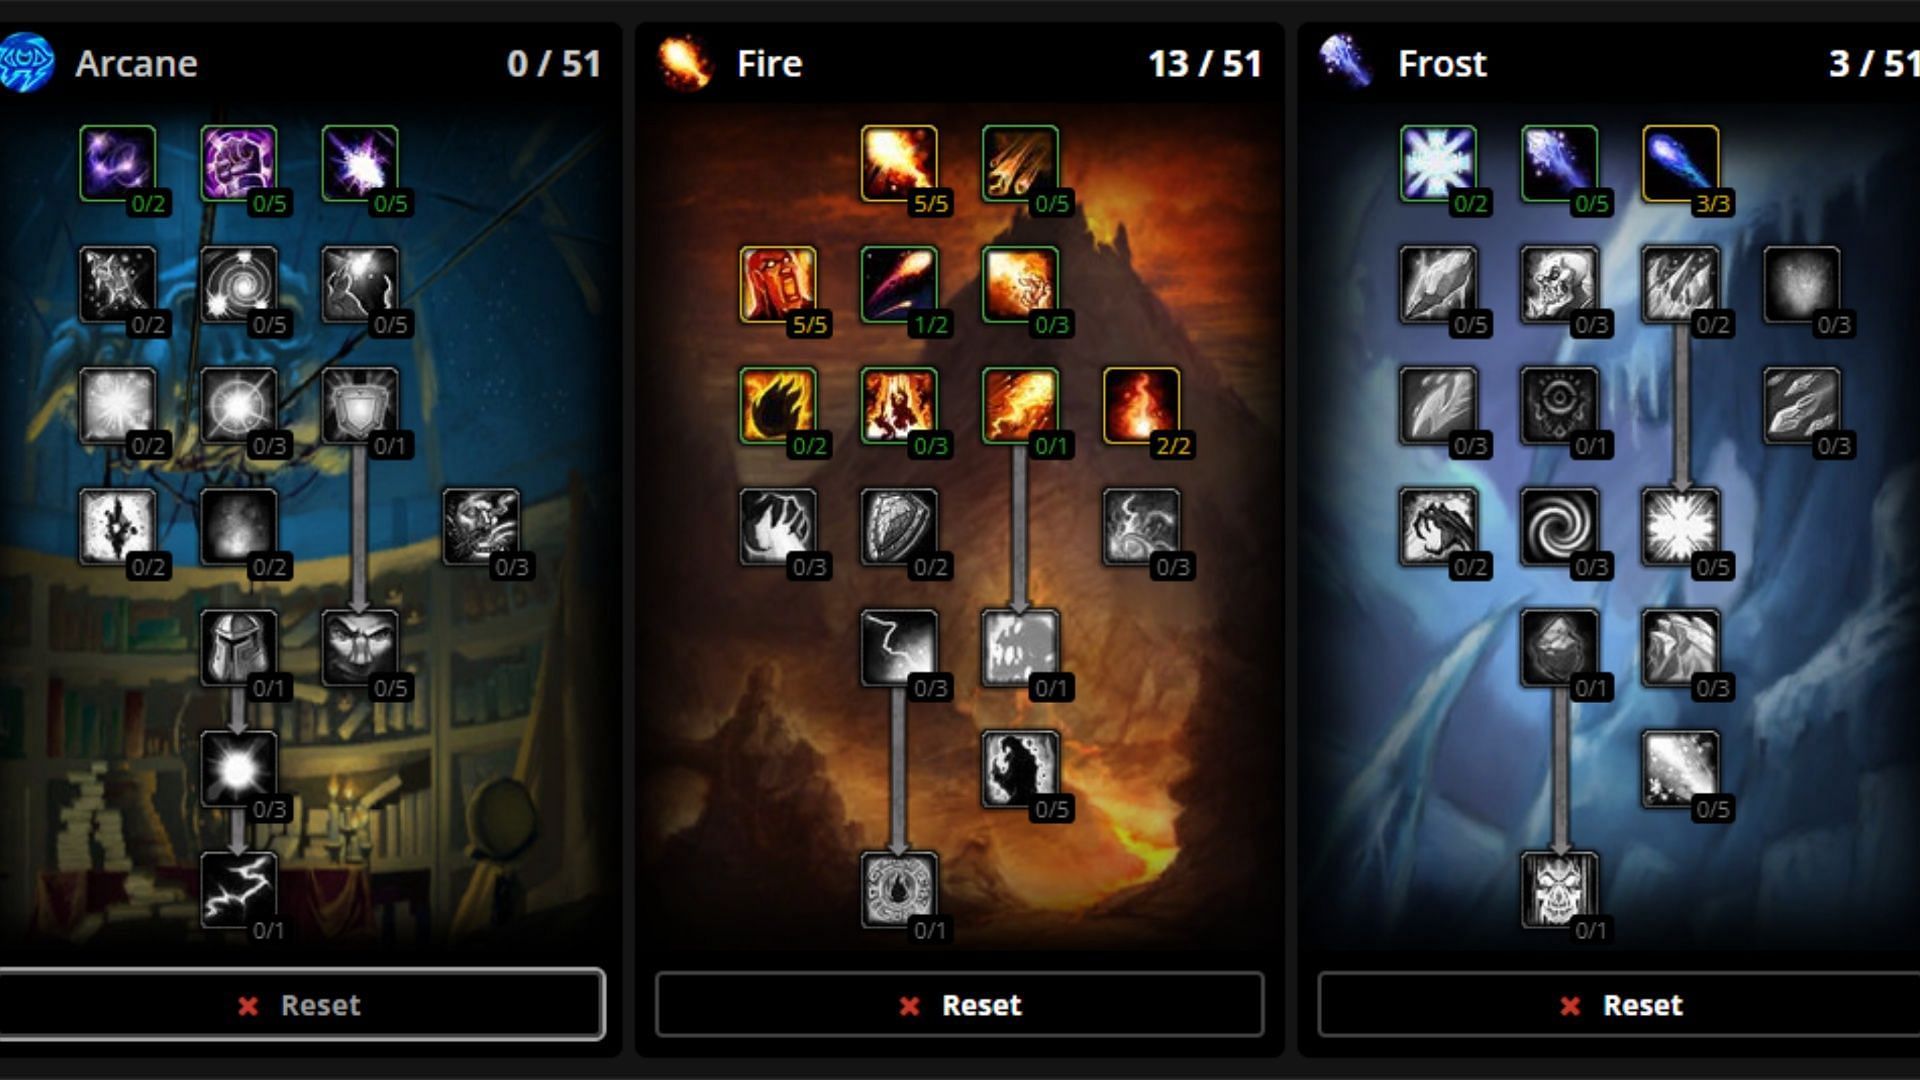 Fire Talent Points for Warcraft Classic (Image via Wowhead.com)